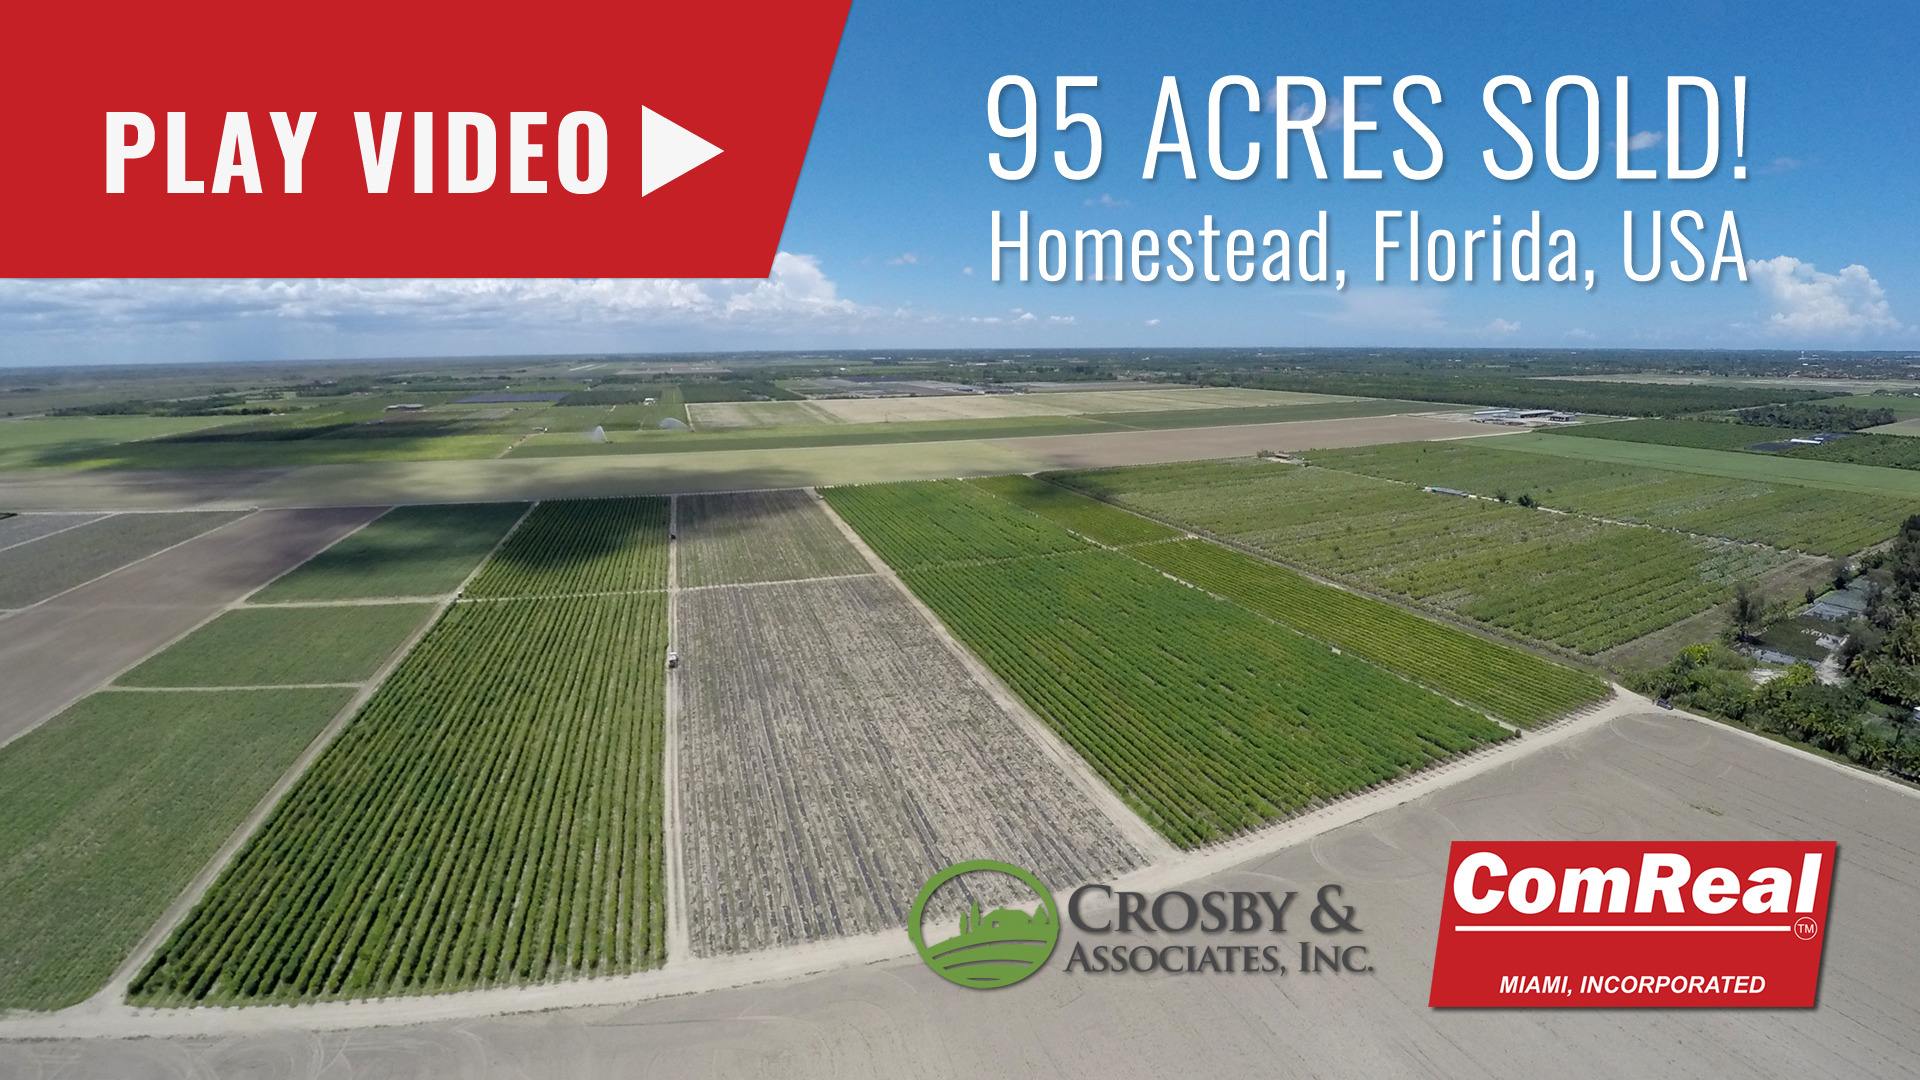 Homestead 95 Acres Sold